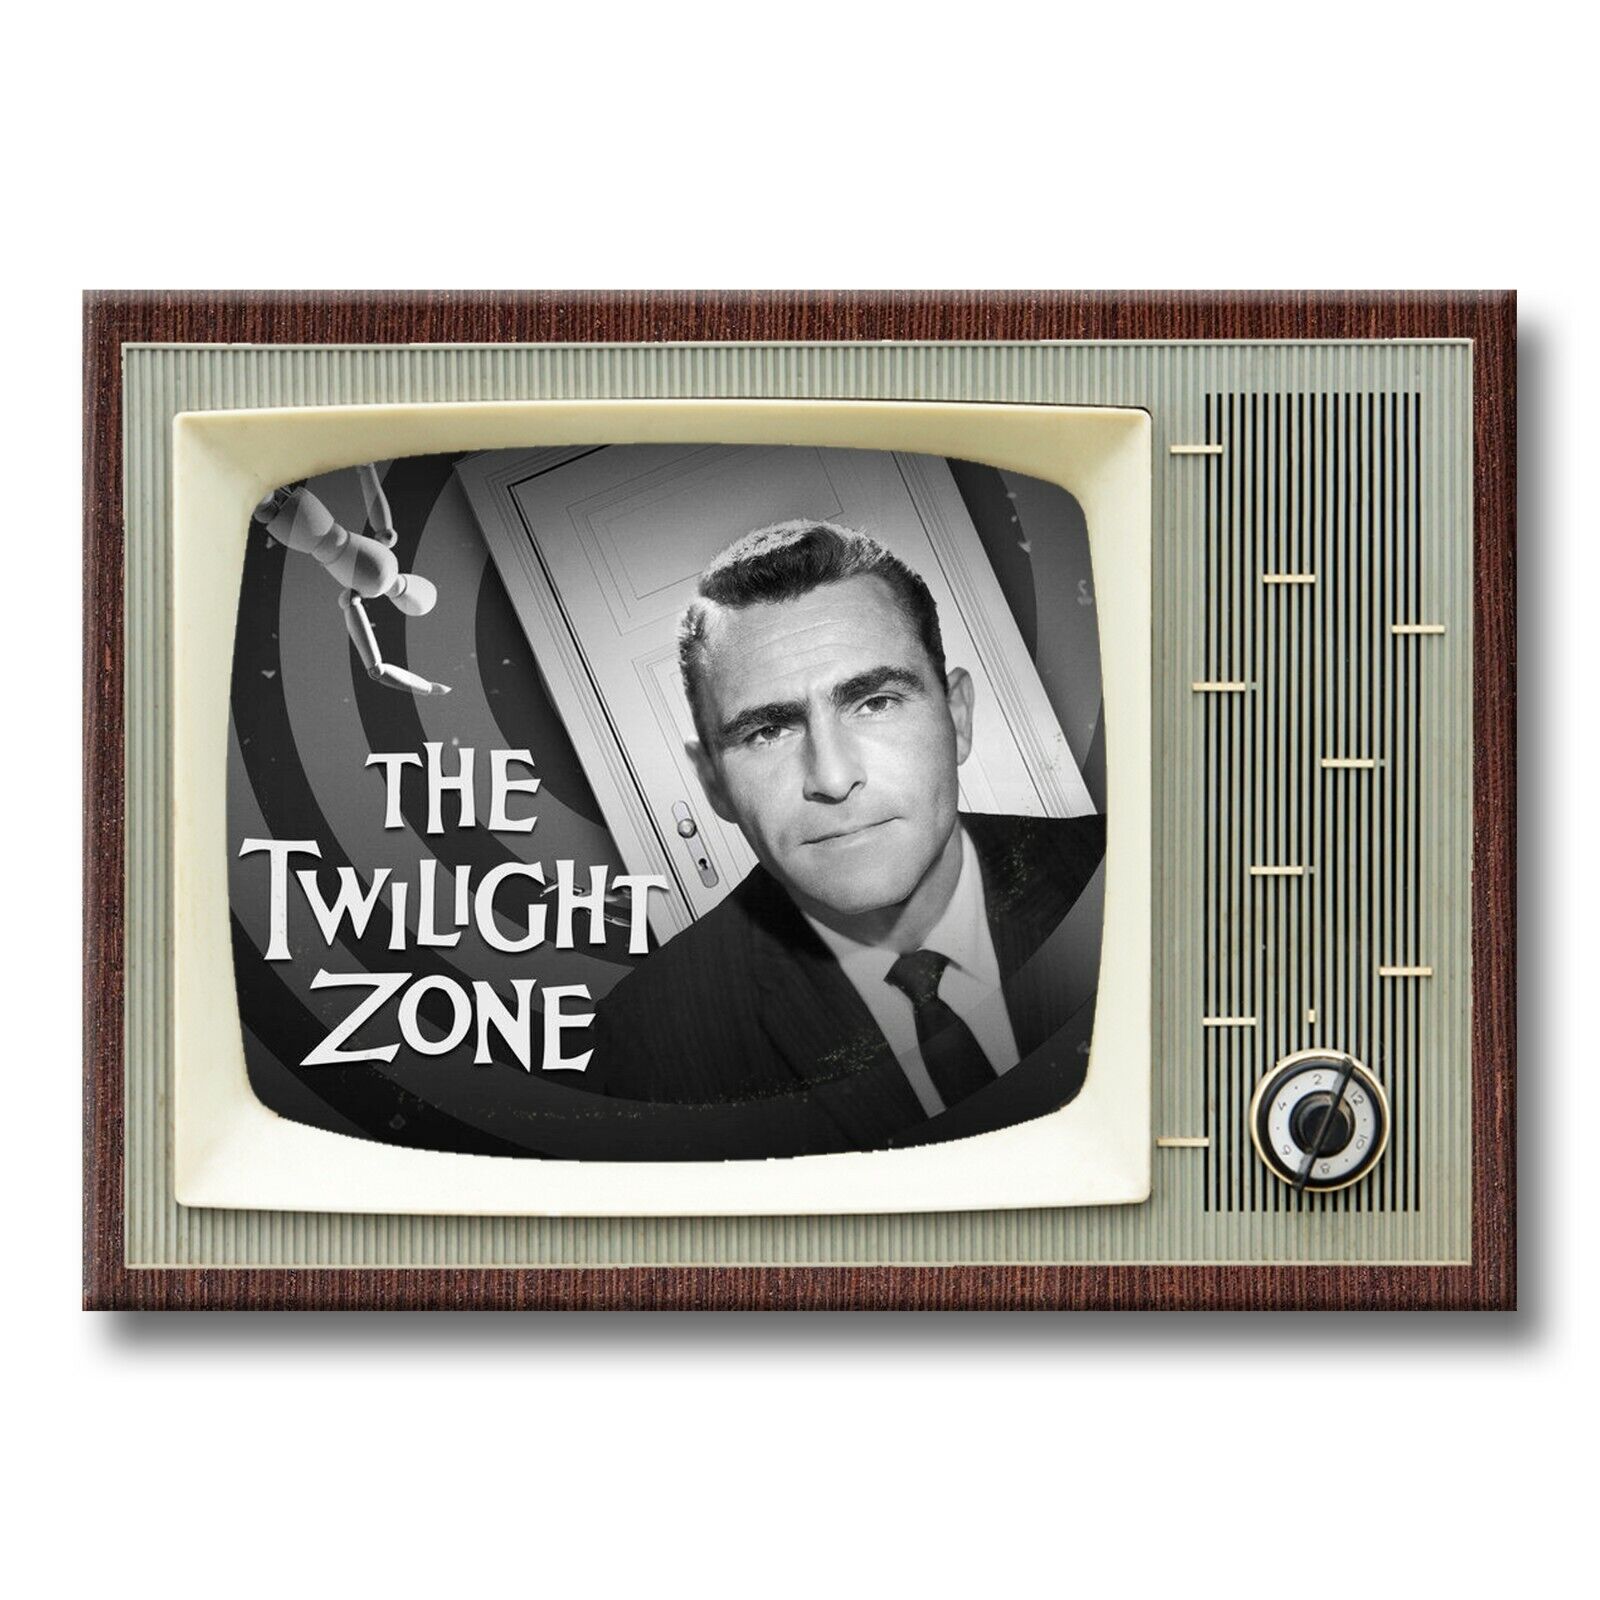 THE TWILIGHT ZONE Classic TV 3.5 inches x 2.5 inches Steel FRIDGE MAGNET